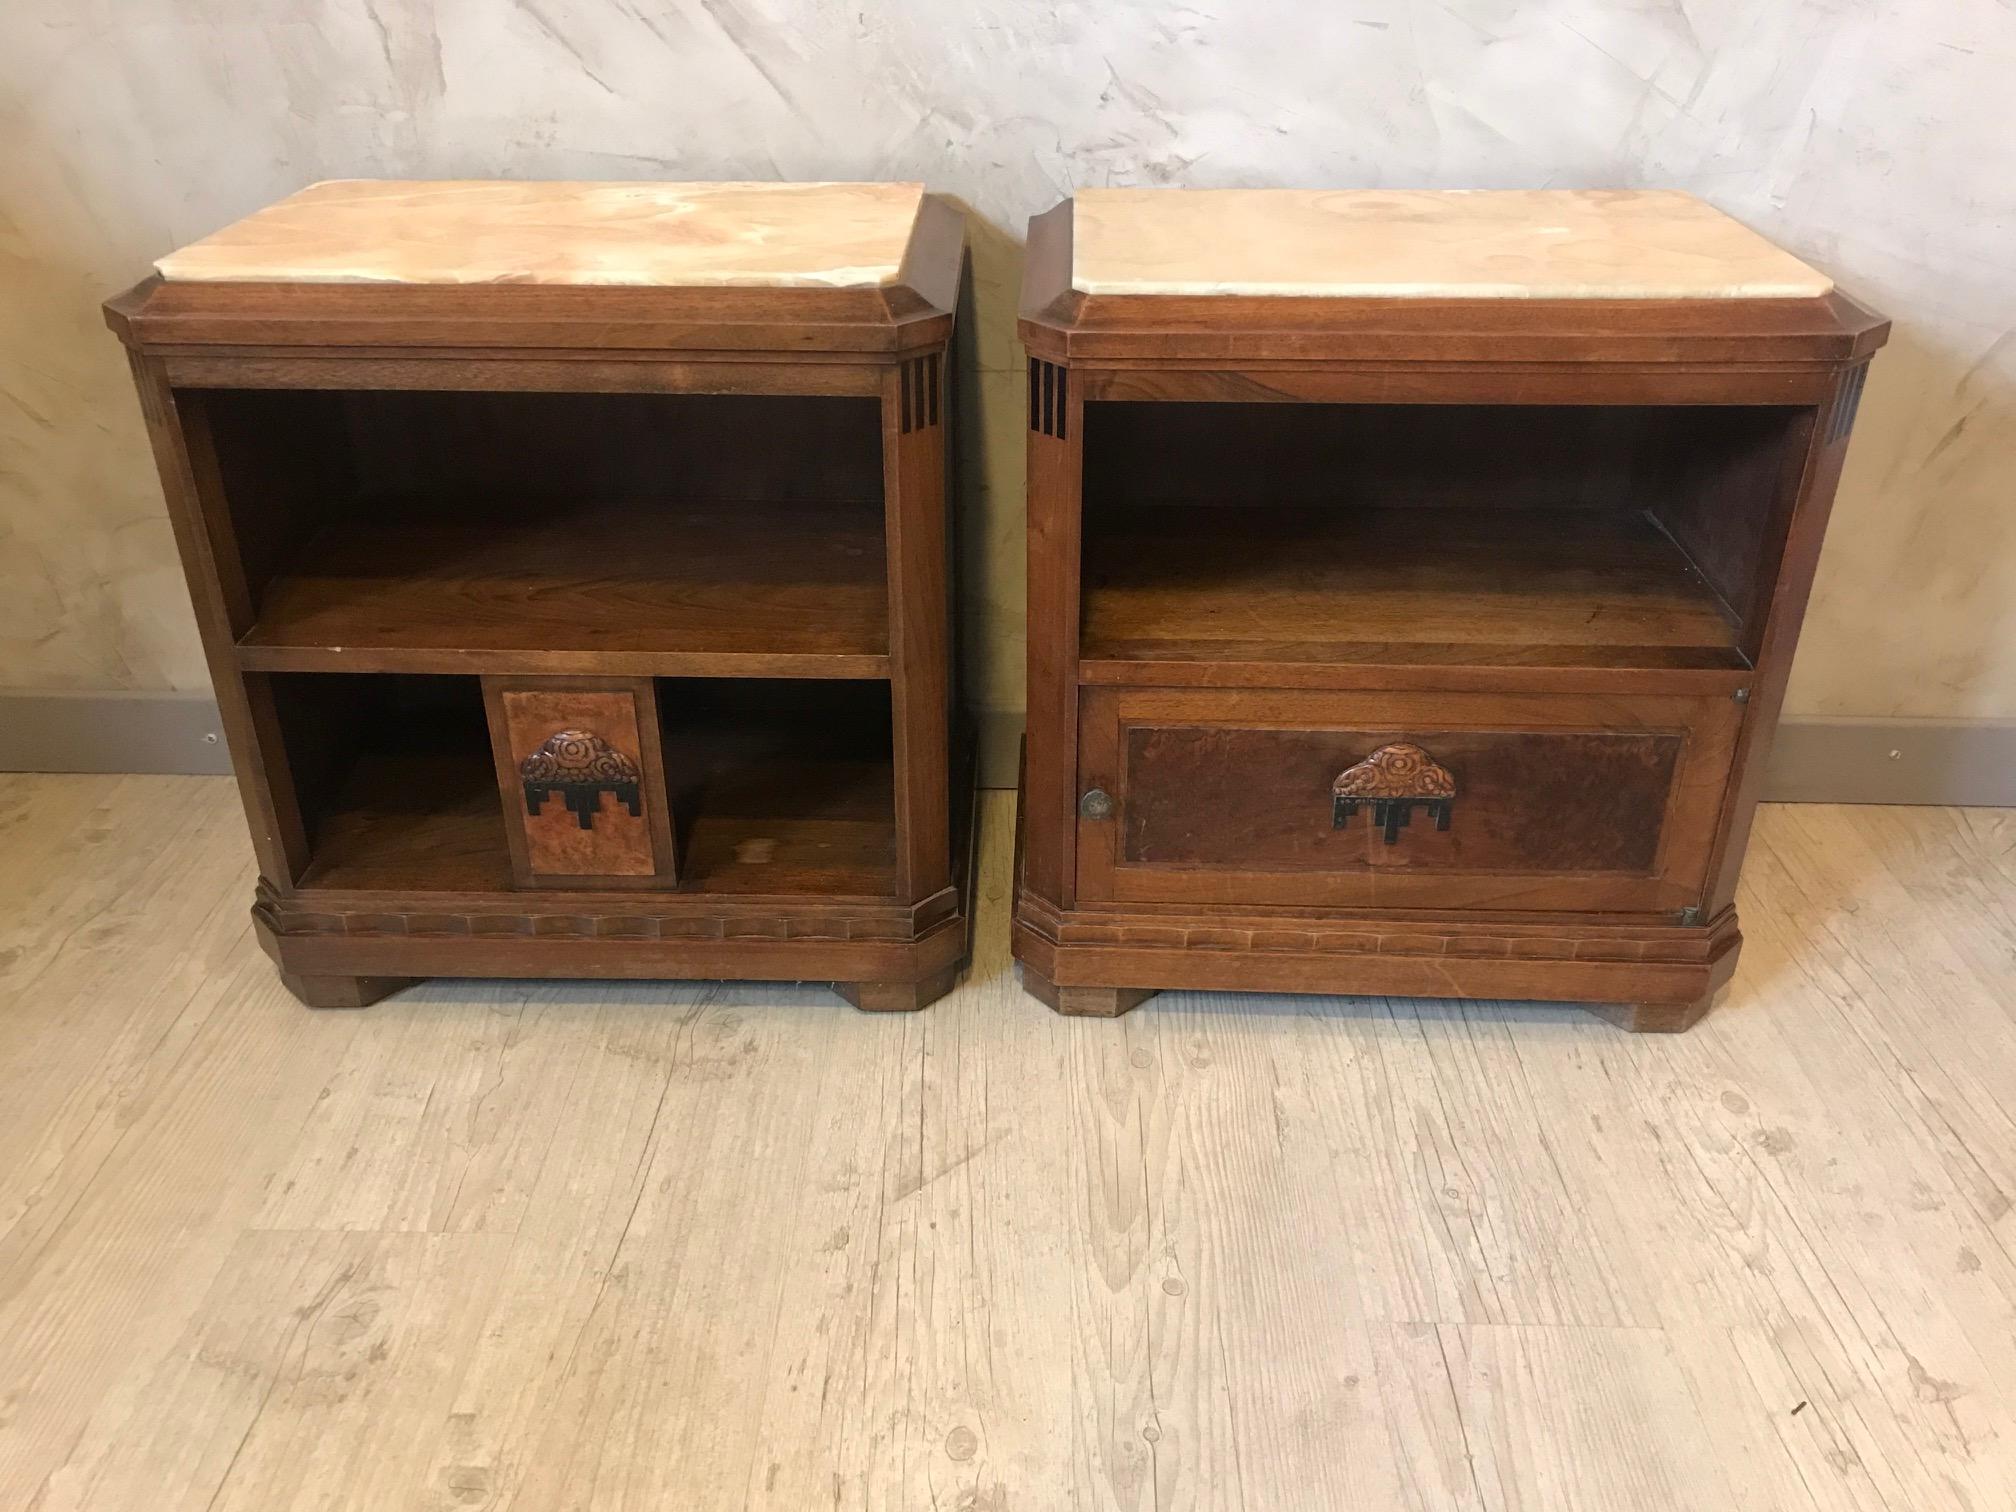 Very nice 20th century French Art Deco pair of bedside table from the 1930s.
Fake pair because on bedside has a door and a marble interior and the other stay open.
Removable marble tops. Typical Art Deco marquetry.
Good quality and condition.